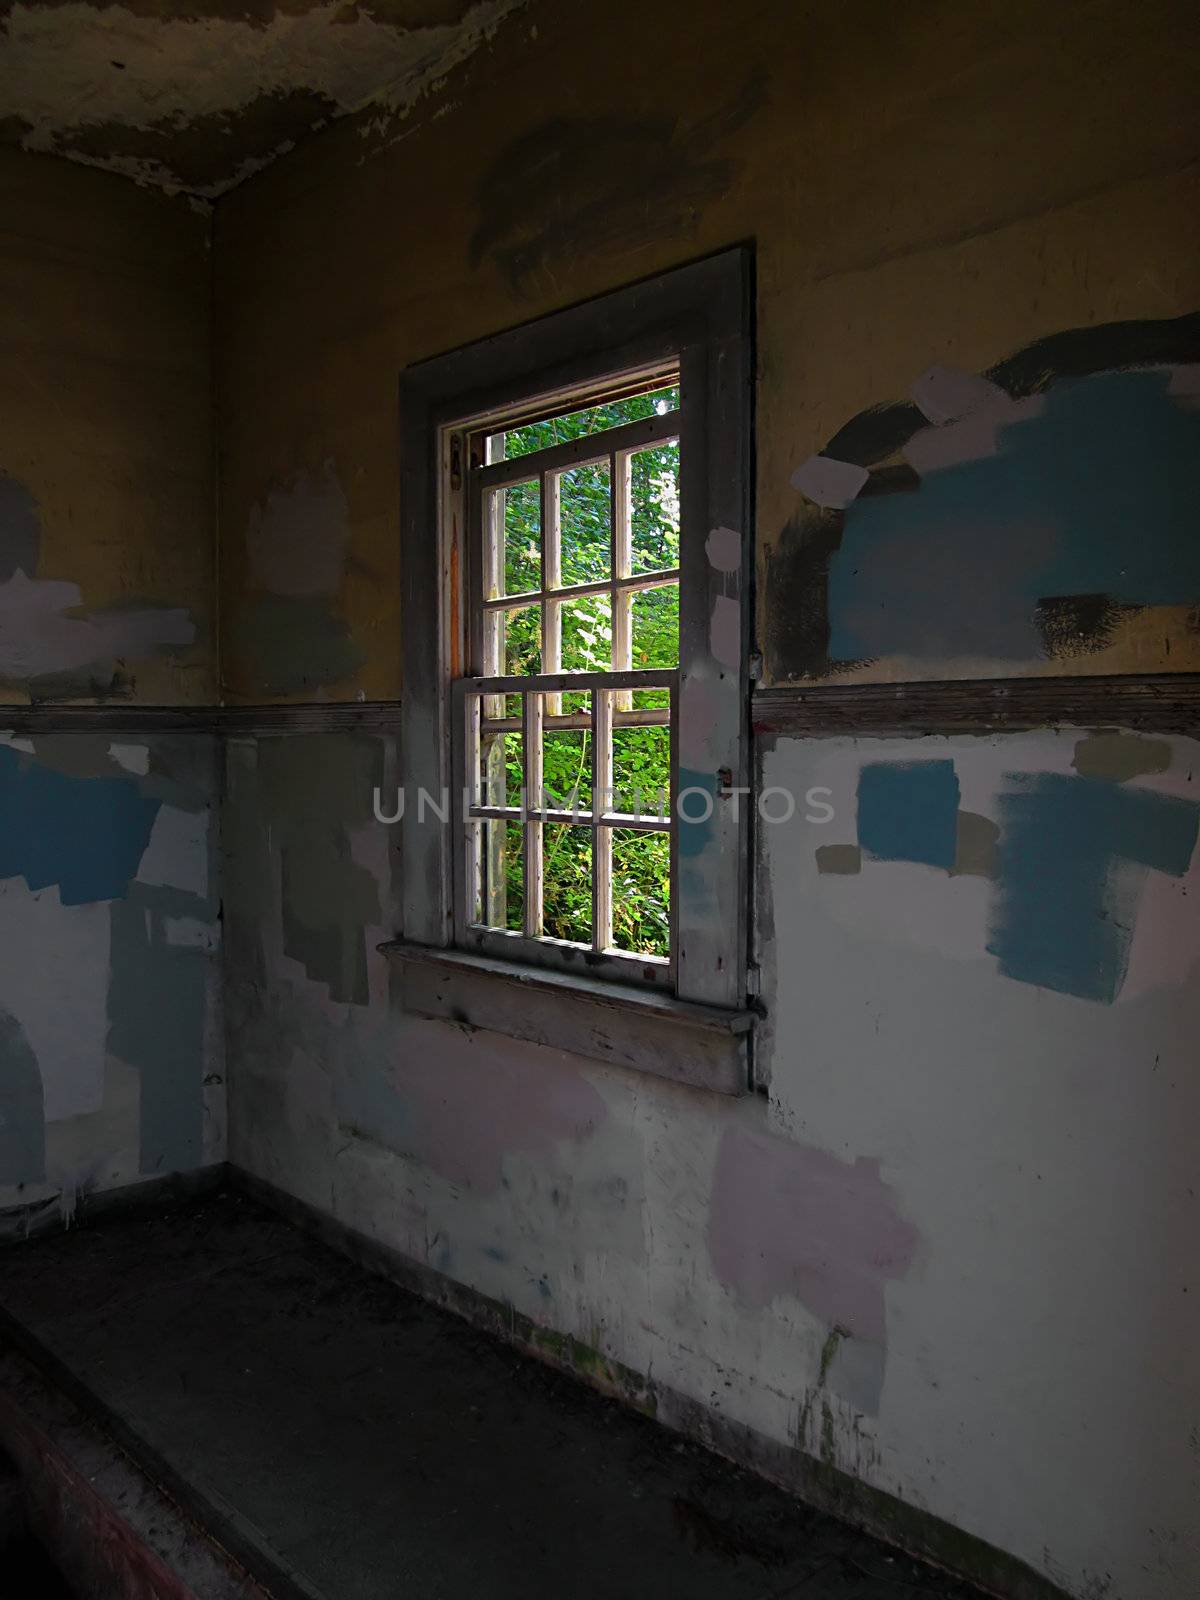 A photograph of an old abandoned building.